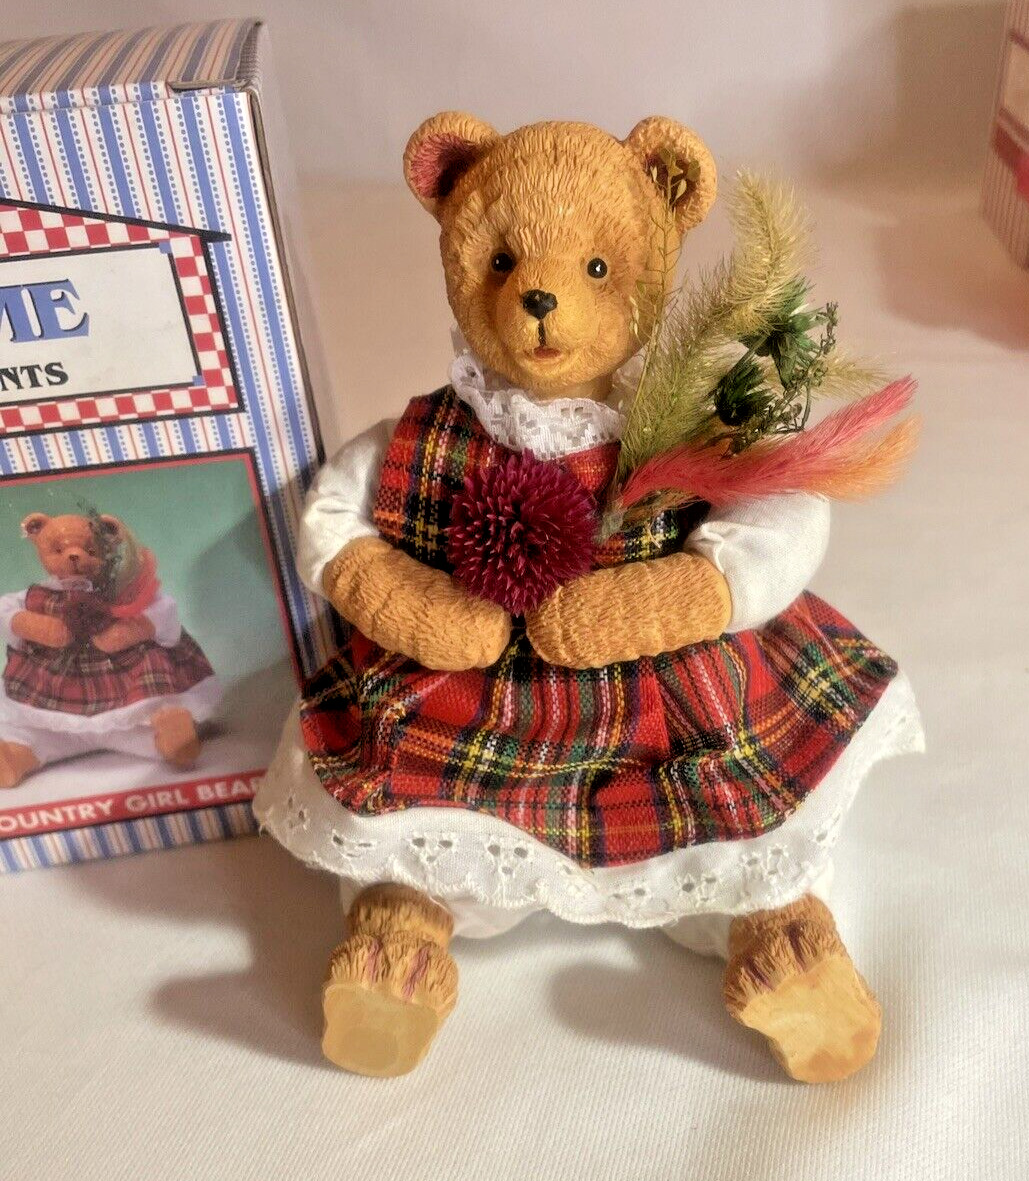 Vintage Country Girl Bear Teddy Toy Red Plaid Dress 